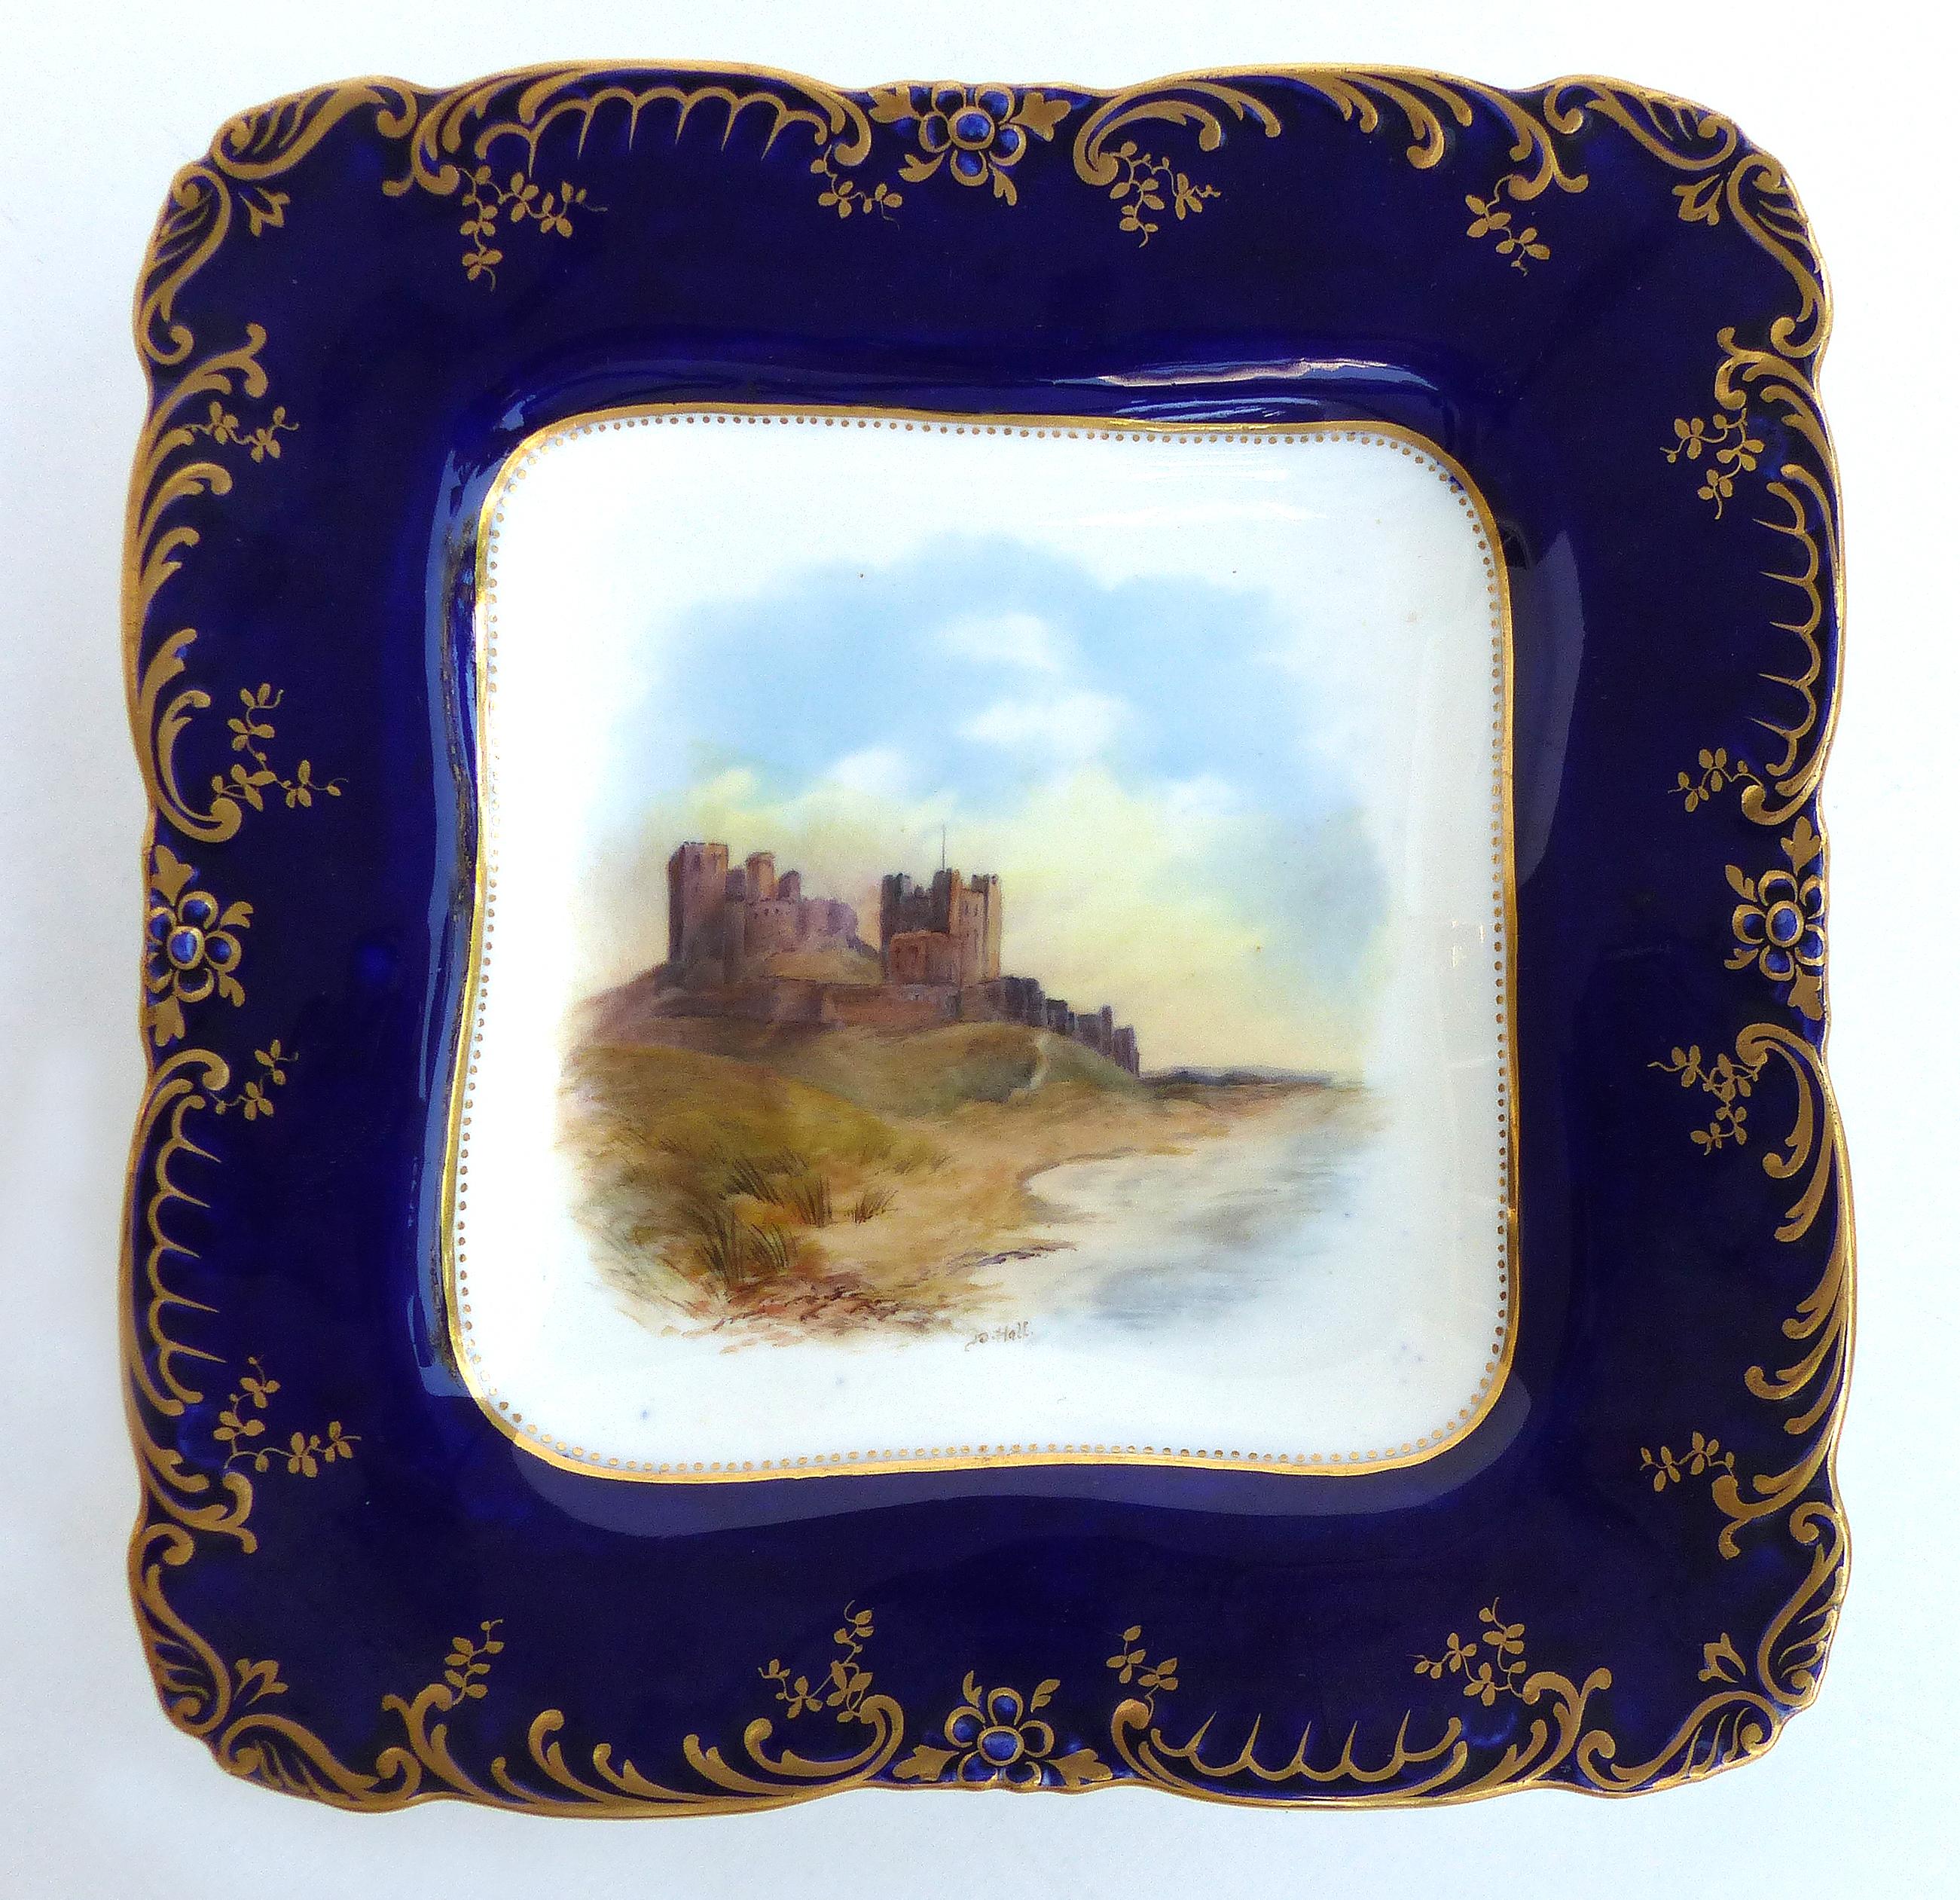 Wedgwood England Hand Painted Landscape Cabinet Plates, Set 3

Offered for sale is a set of three hand painted and artist-signed cabinet plates depicting United Kingdom landmarks. The round plate depicts Llyn Elsi from Betws-y-Coed located in